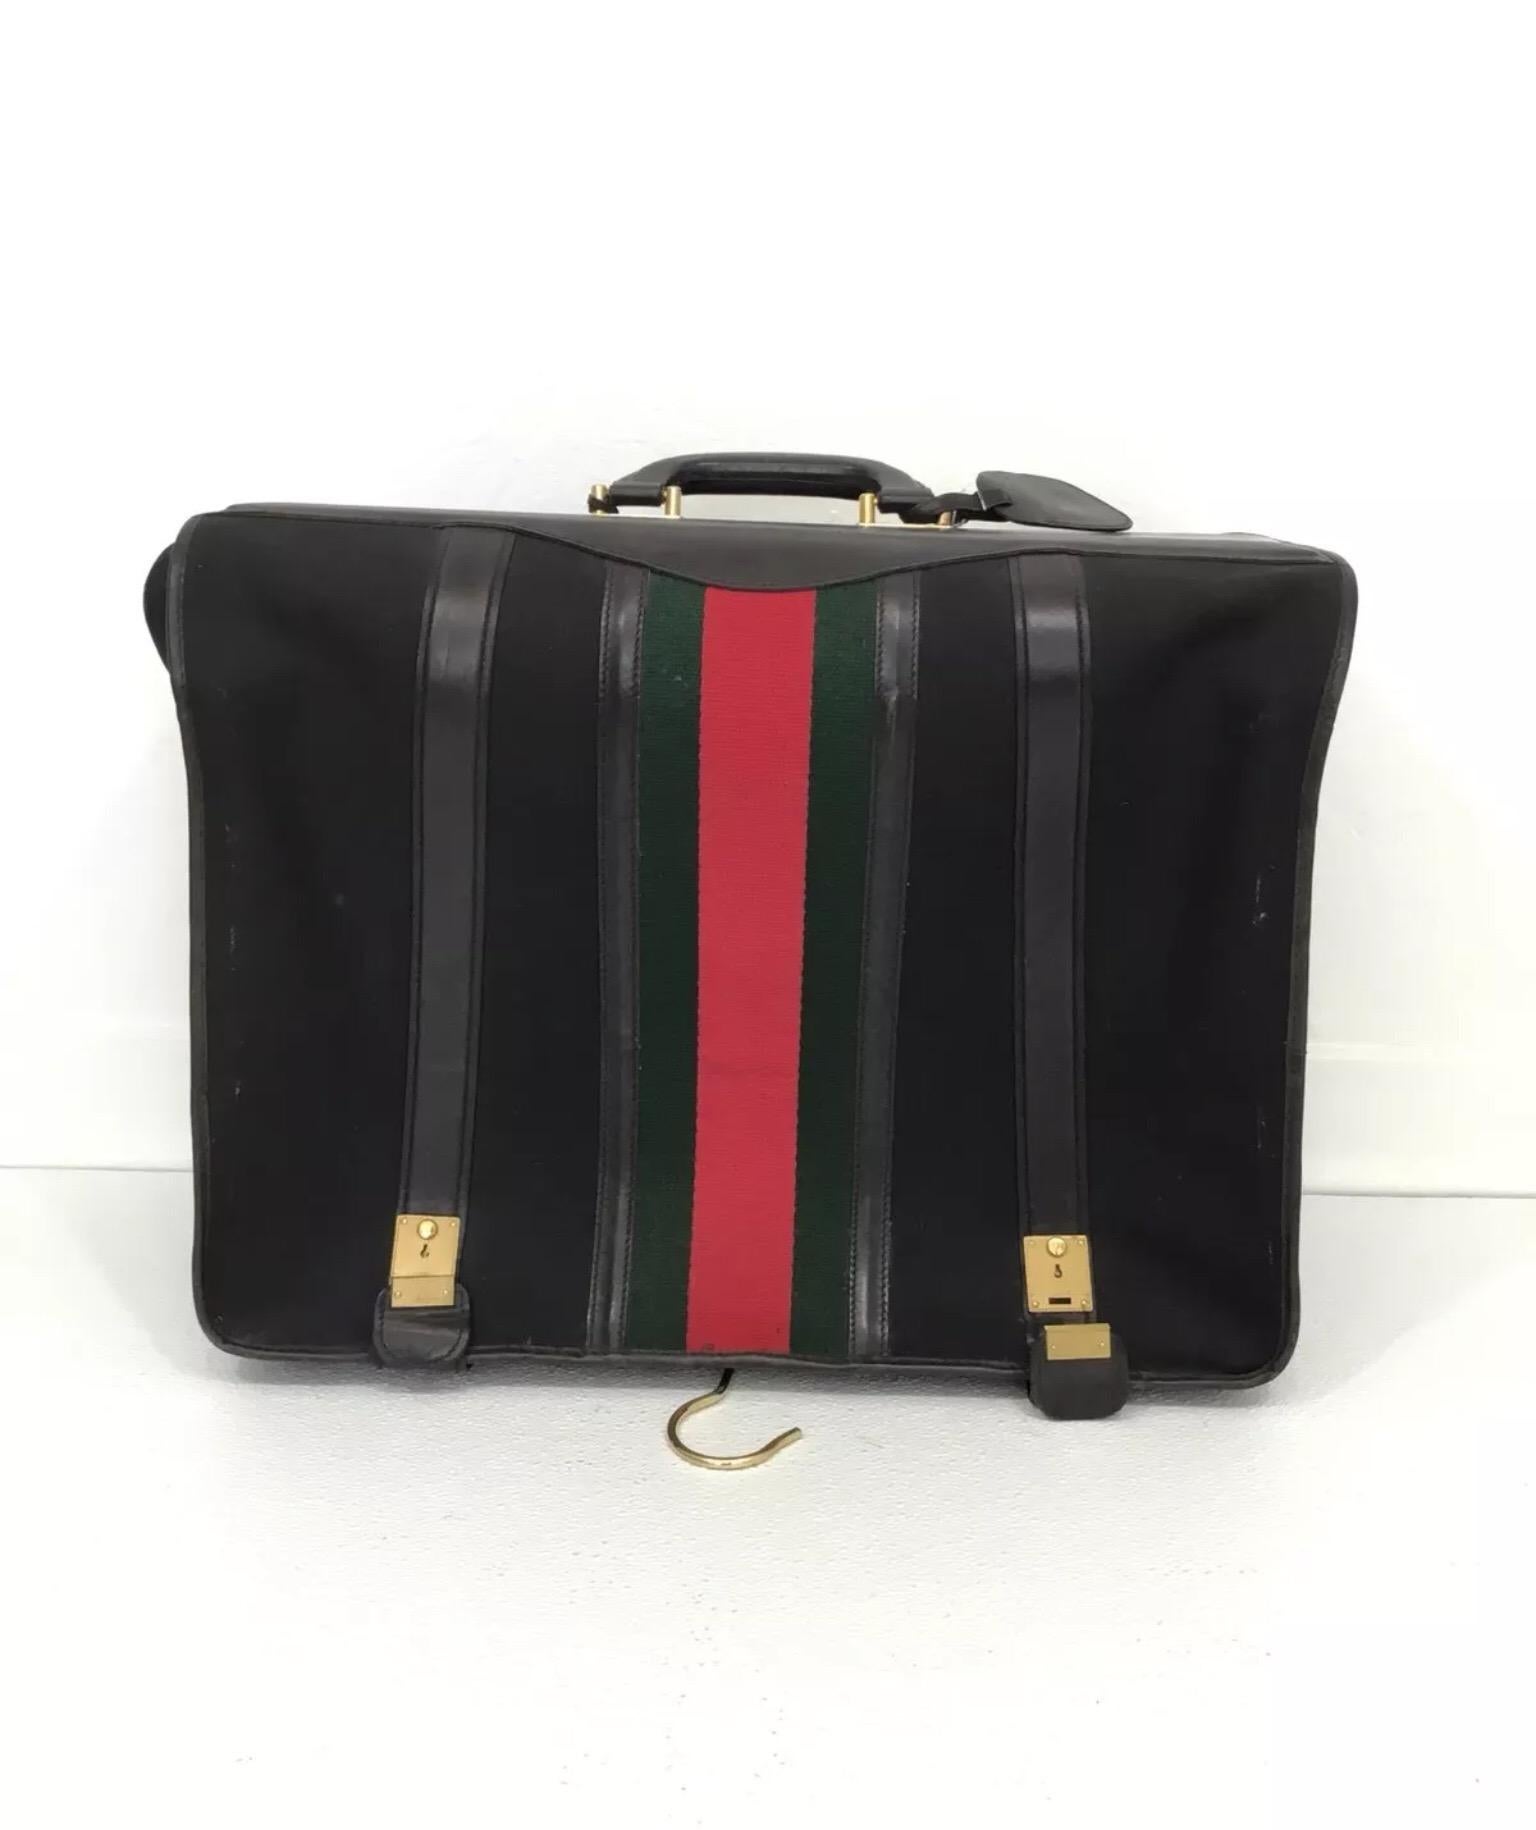 Gucci Vintage Garment Suitcase

• Gucci vintage travel suitcase features a signature red and green web stripe down the center, dual zipper closures

• Metal feet at the base to protect the canvas fabric

• Suitcase is in great vintage condition with